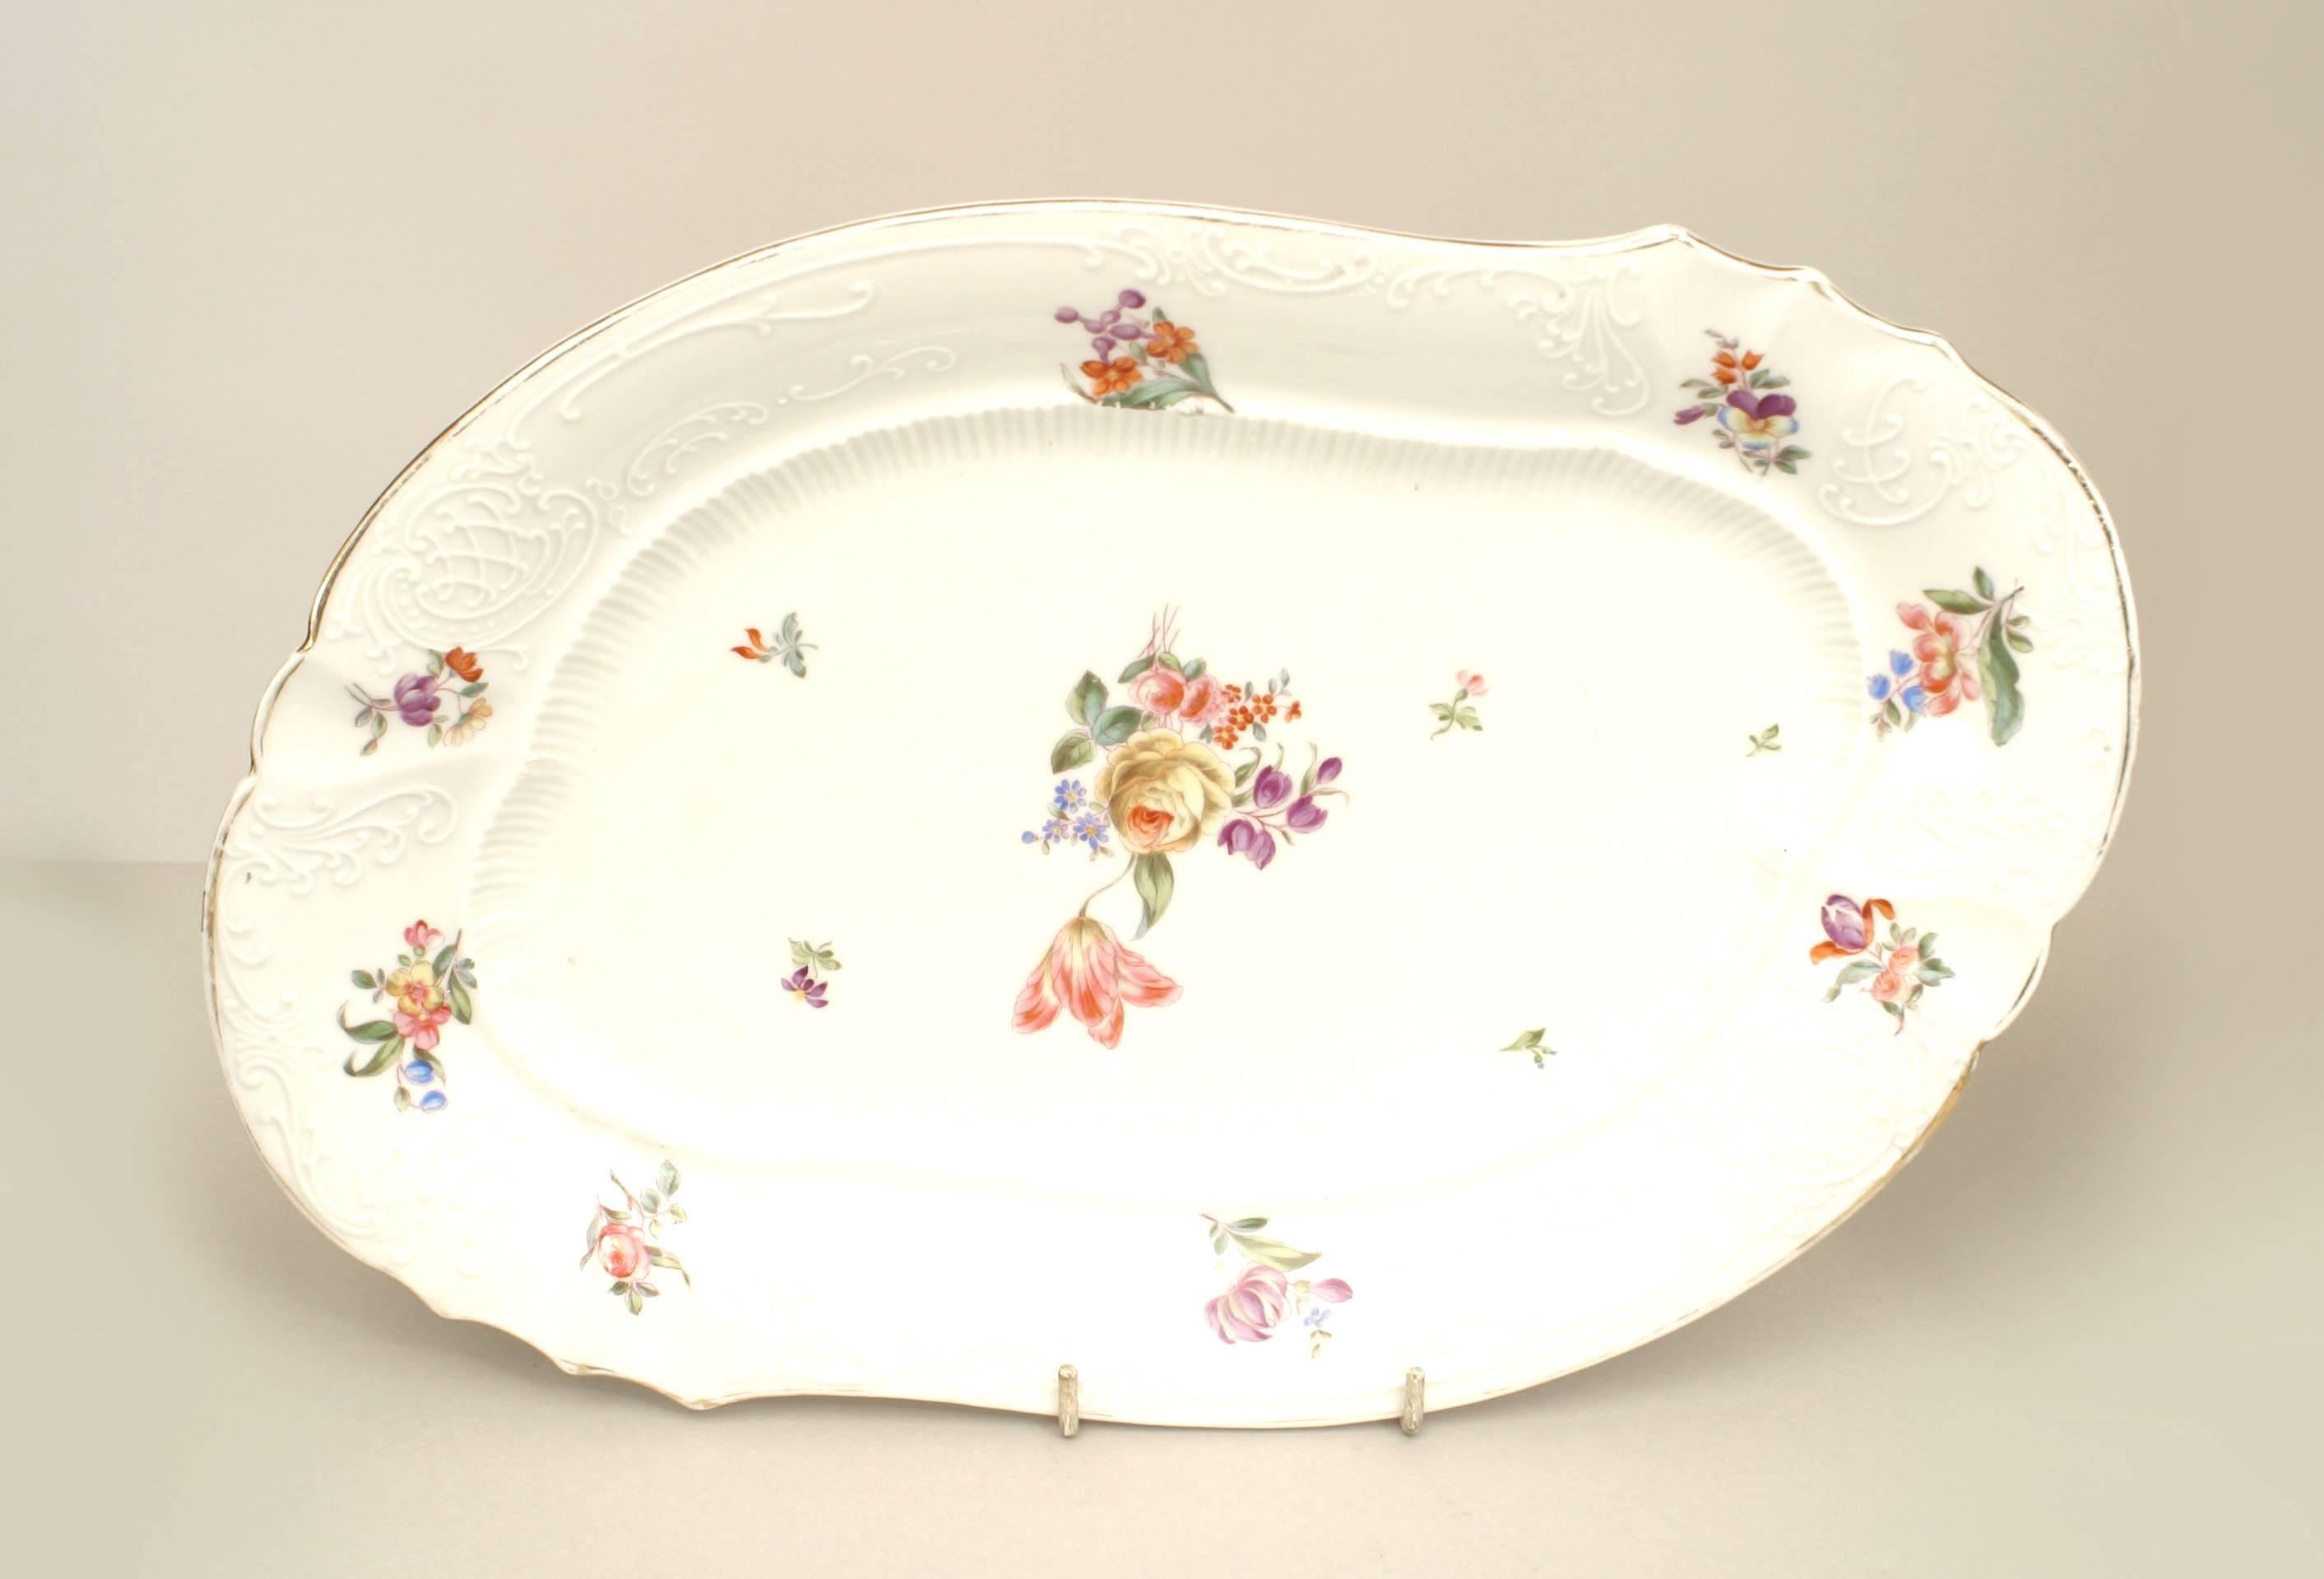 Continental German (19th Century) white porcelain dinner service painted with floral decoration & scalloped edge with gilt trim - 102 pieces total. (PRICED AS SET)
